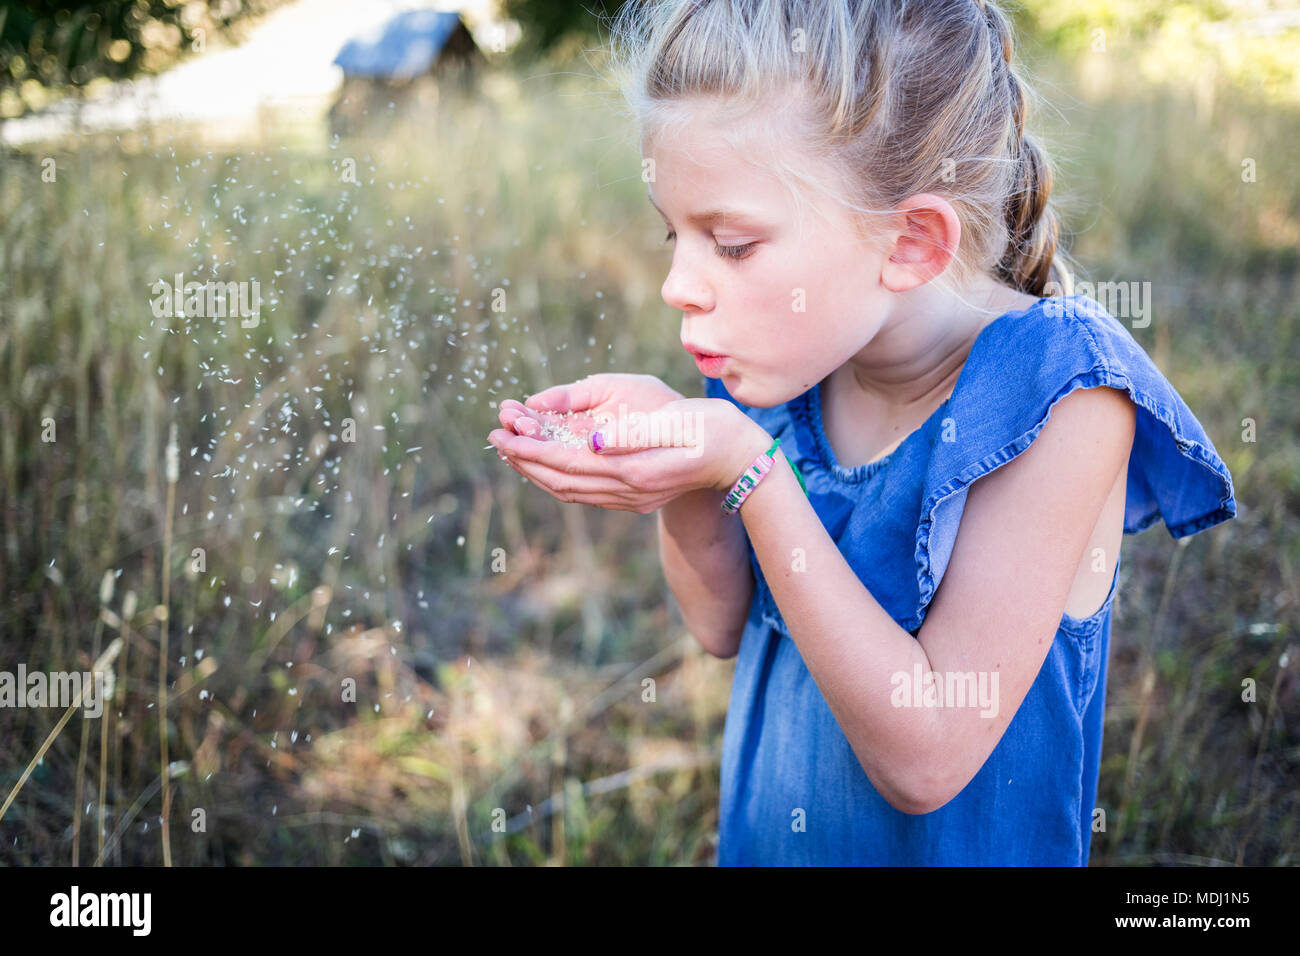 A young girl blows a small grain from her cupped hands into the air; Salmon Arm, British Columbia, Canada Stock Photo